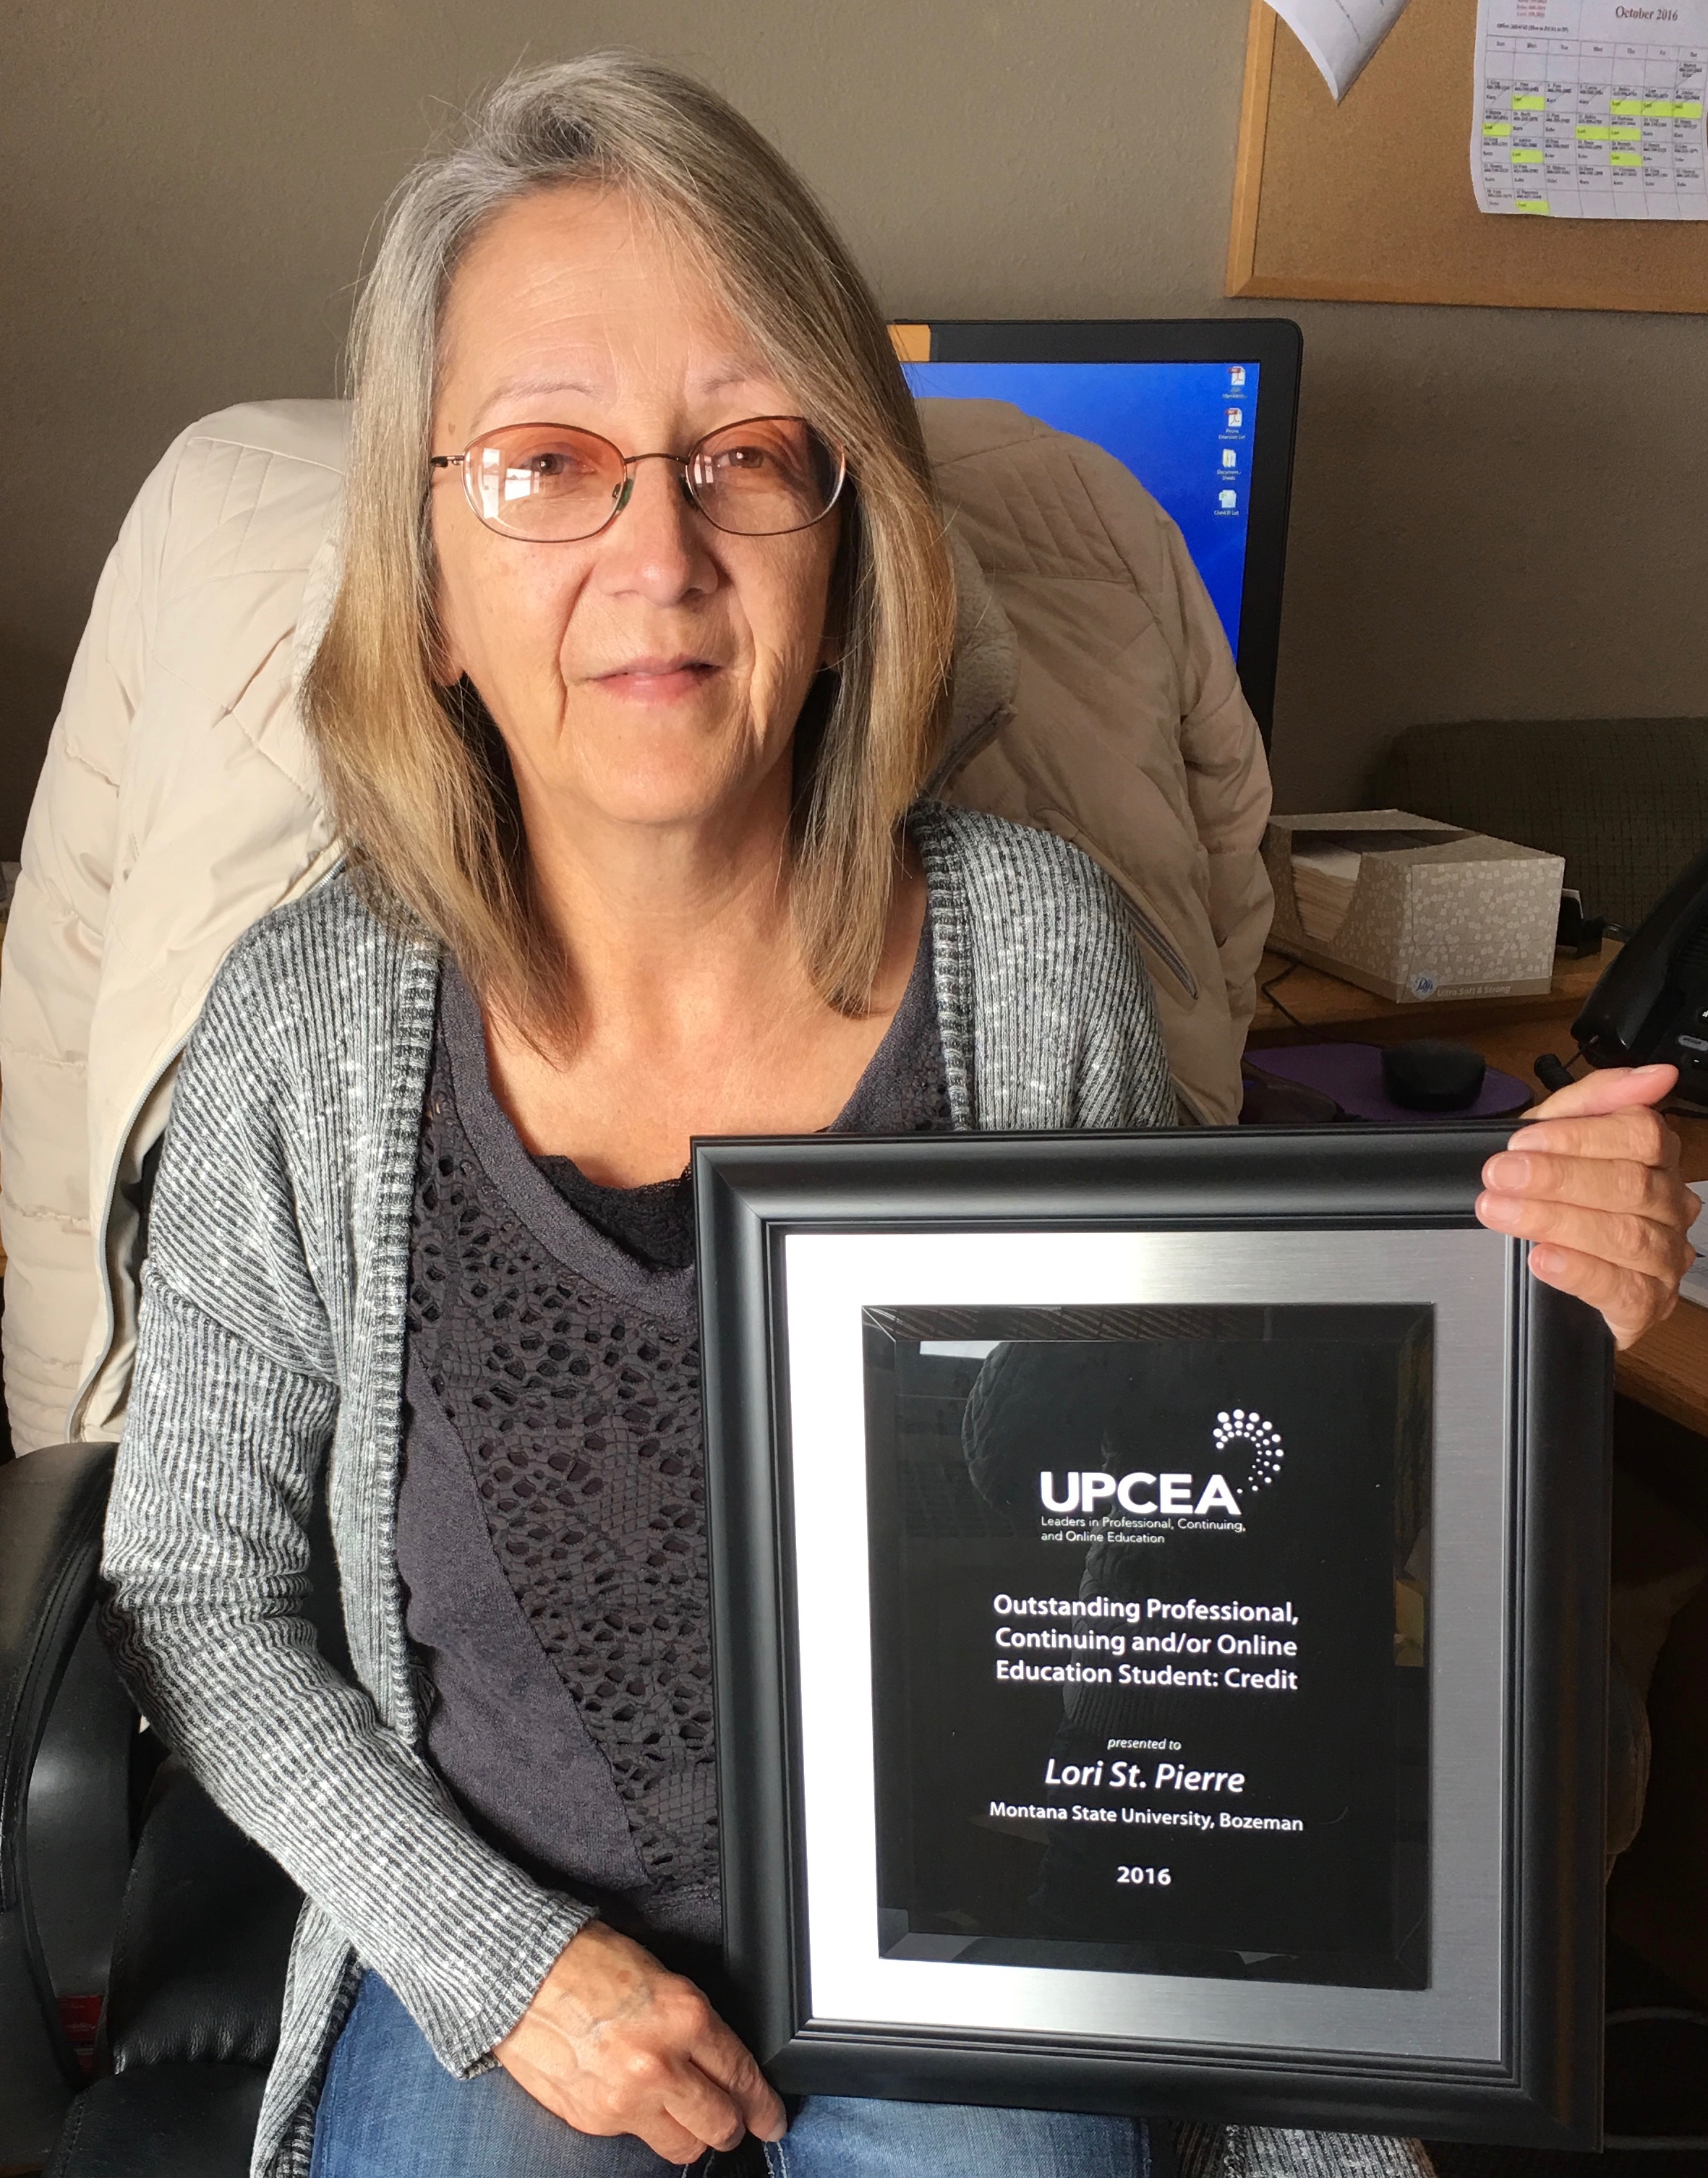 Lori St. Pierre in her office with award plaque